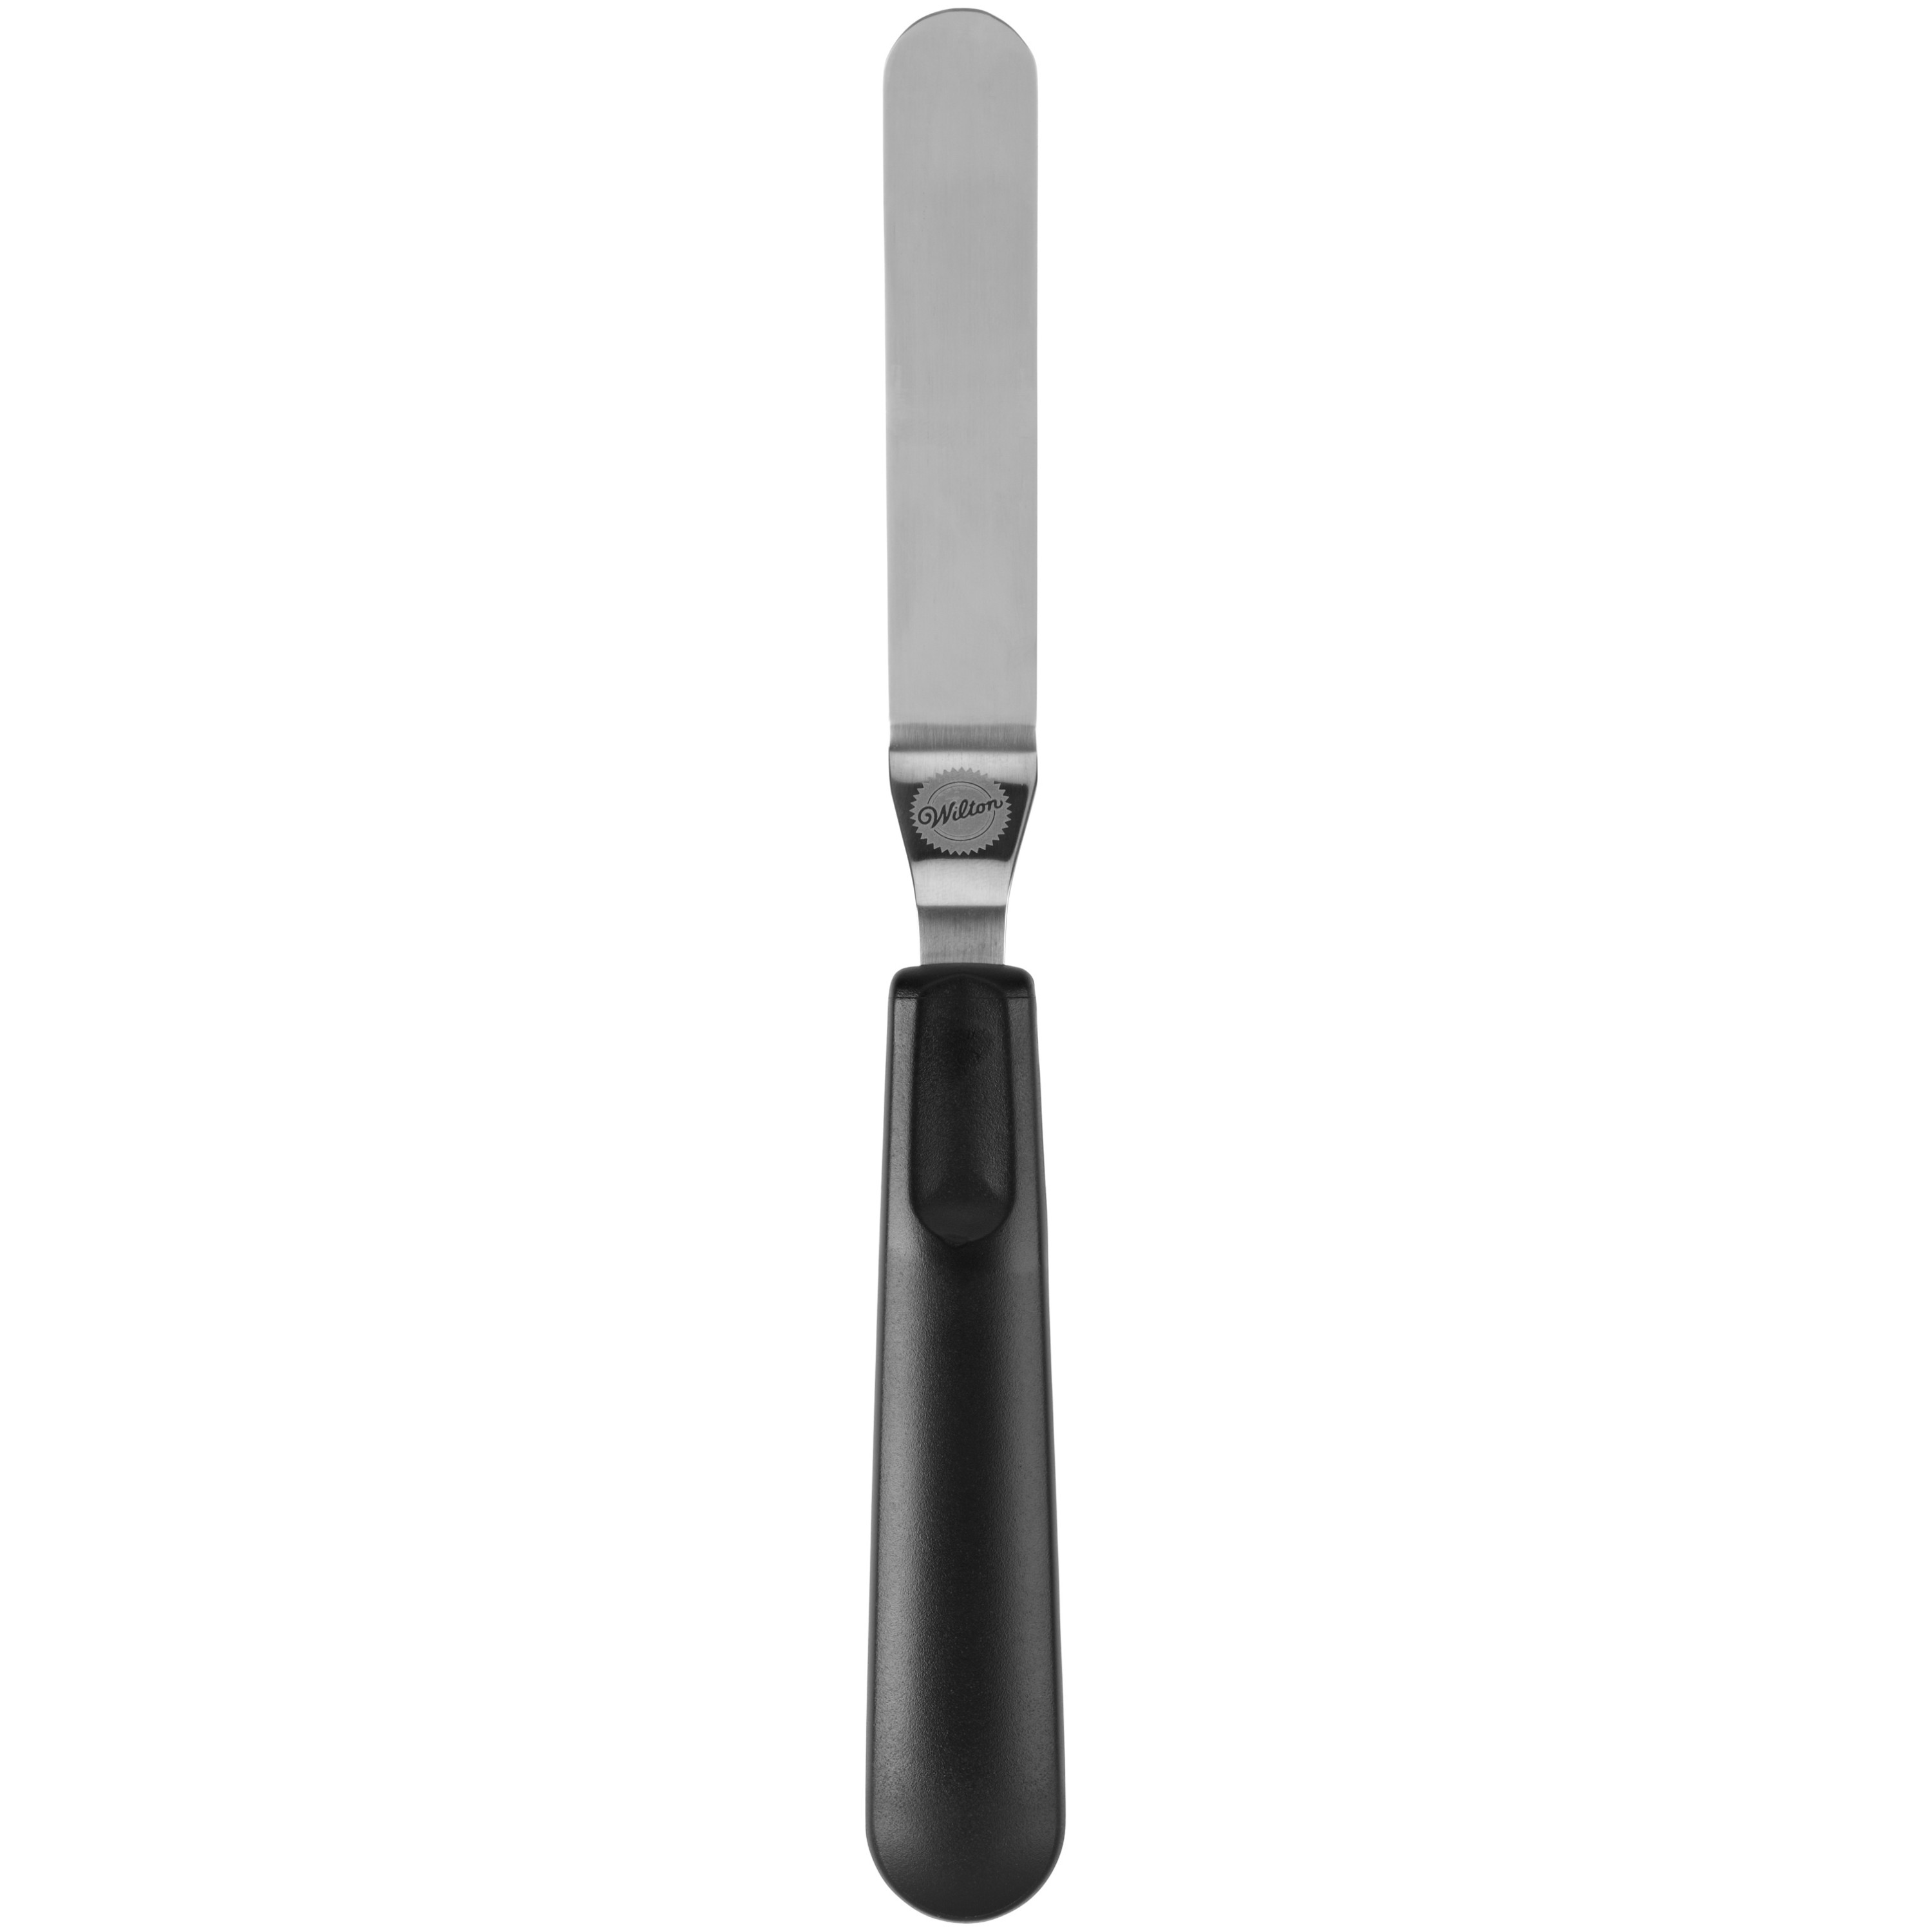 Wilton Angled Icing Spatula with Black Handle, 9-Inch - image 1 of 6